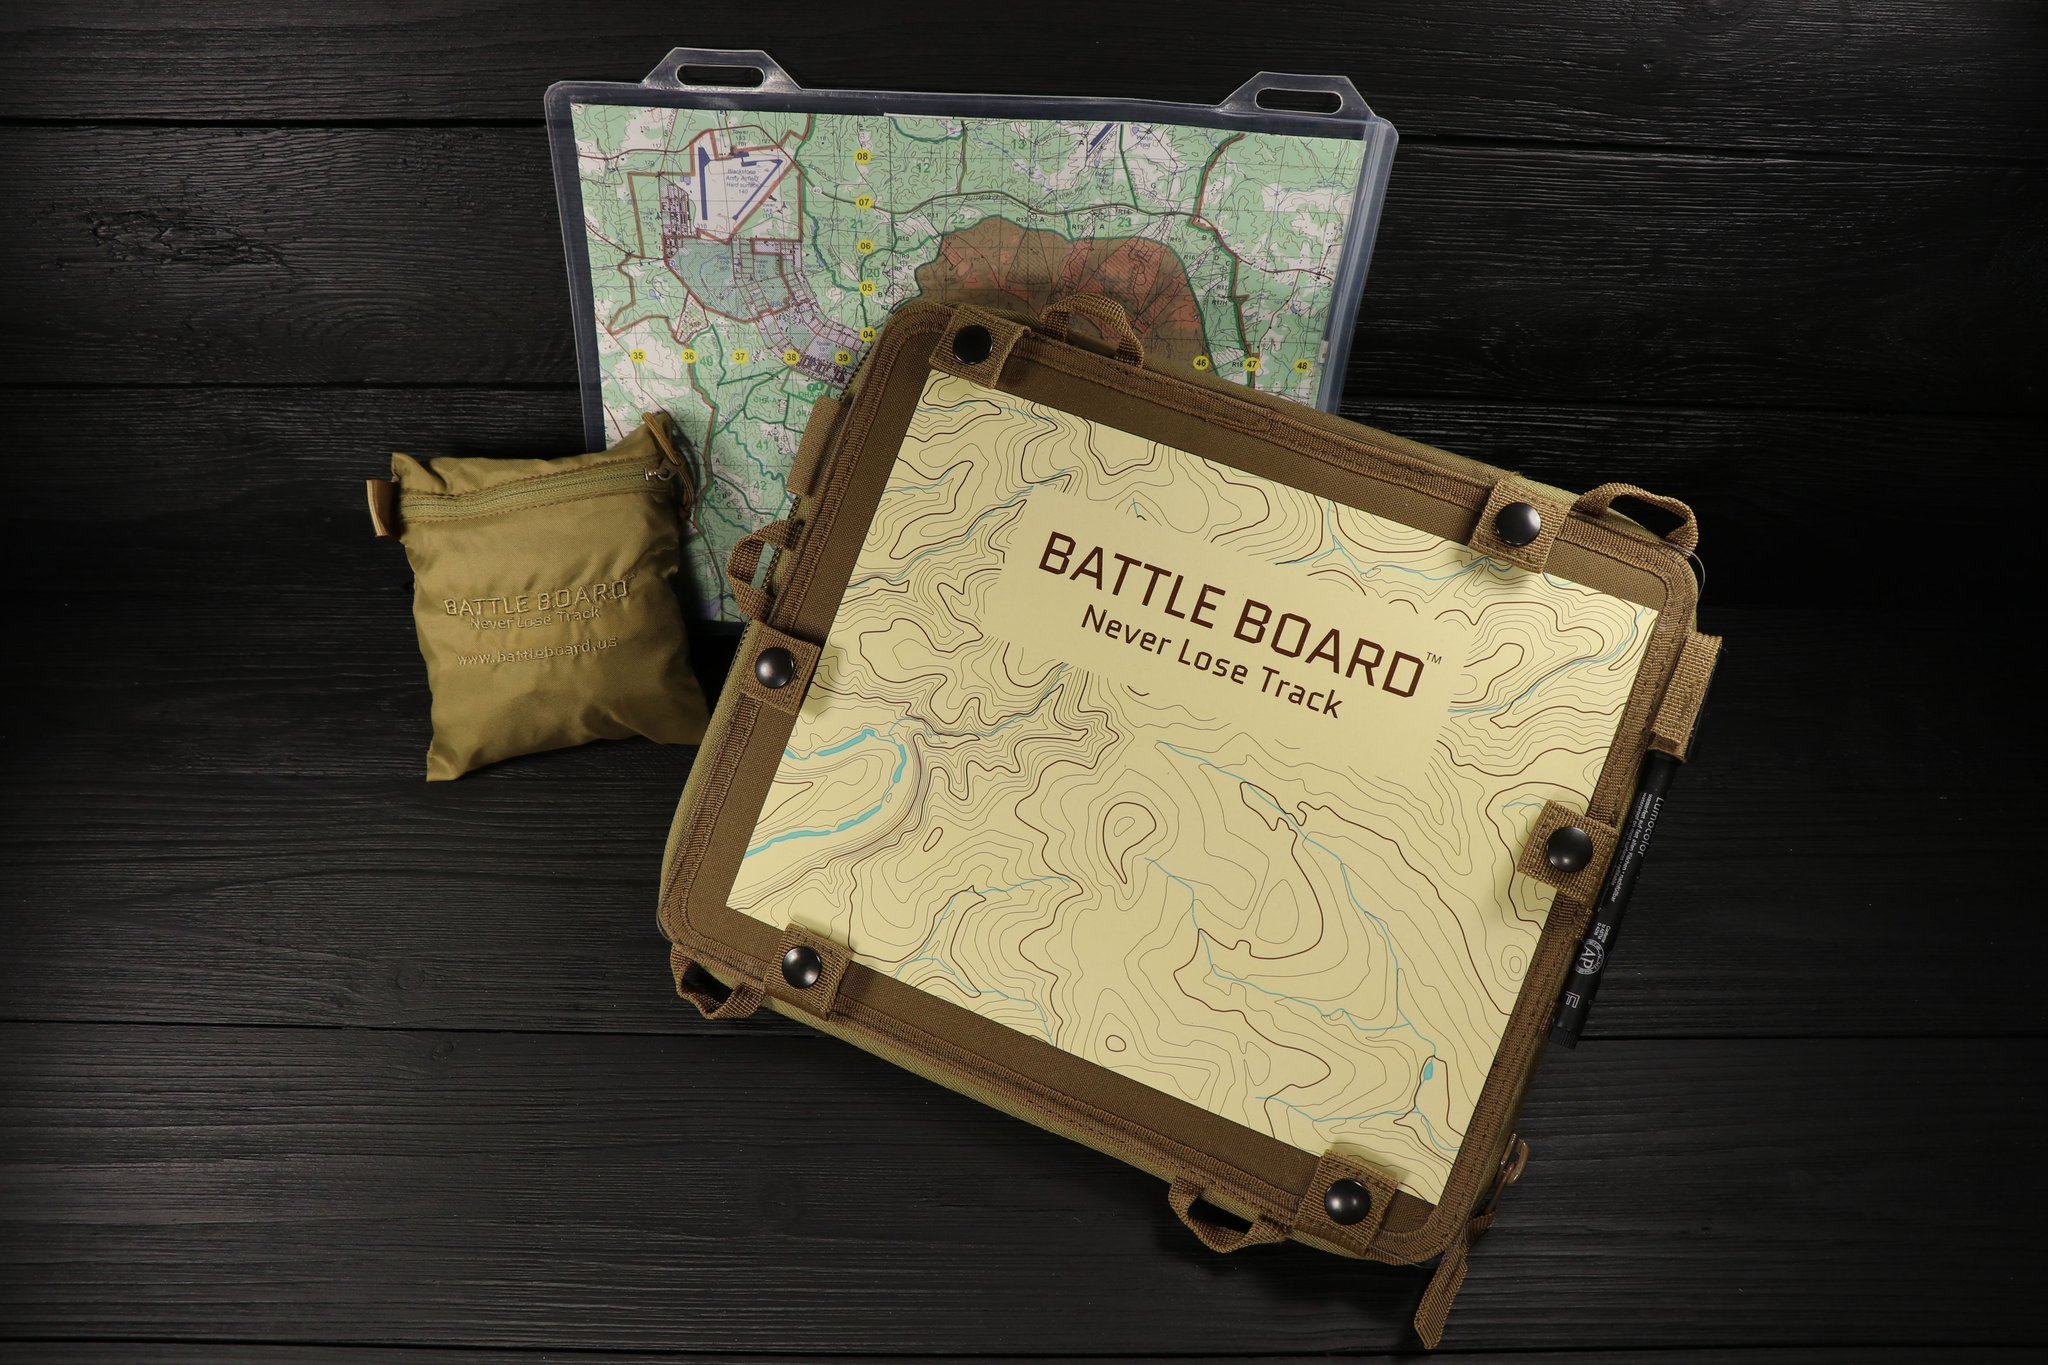 Have you played… Battleboard?